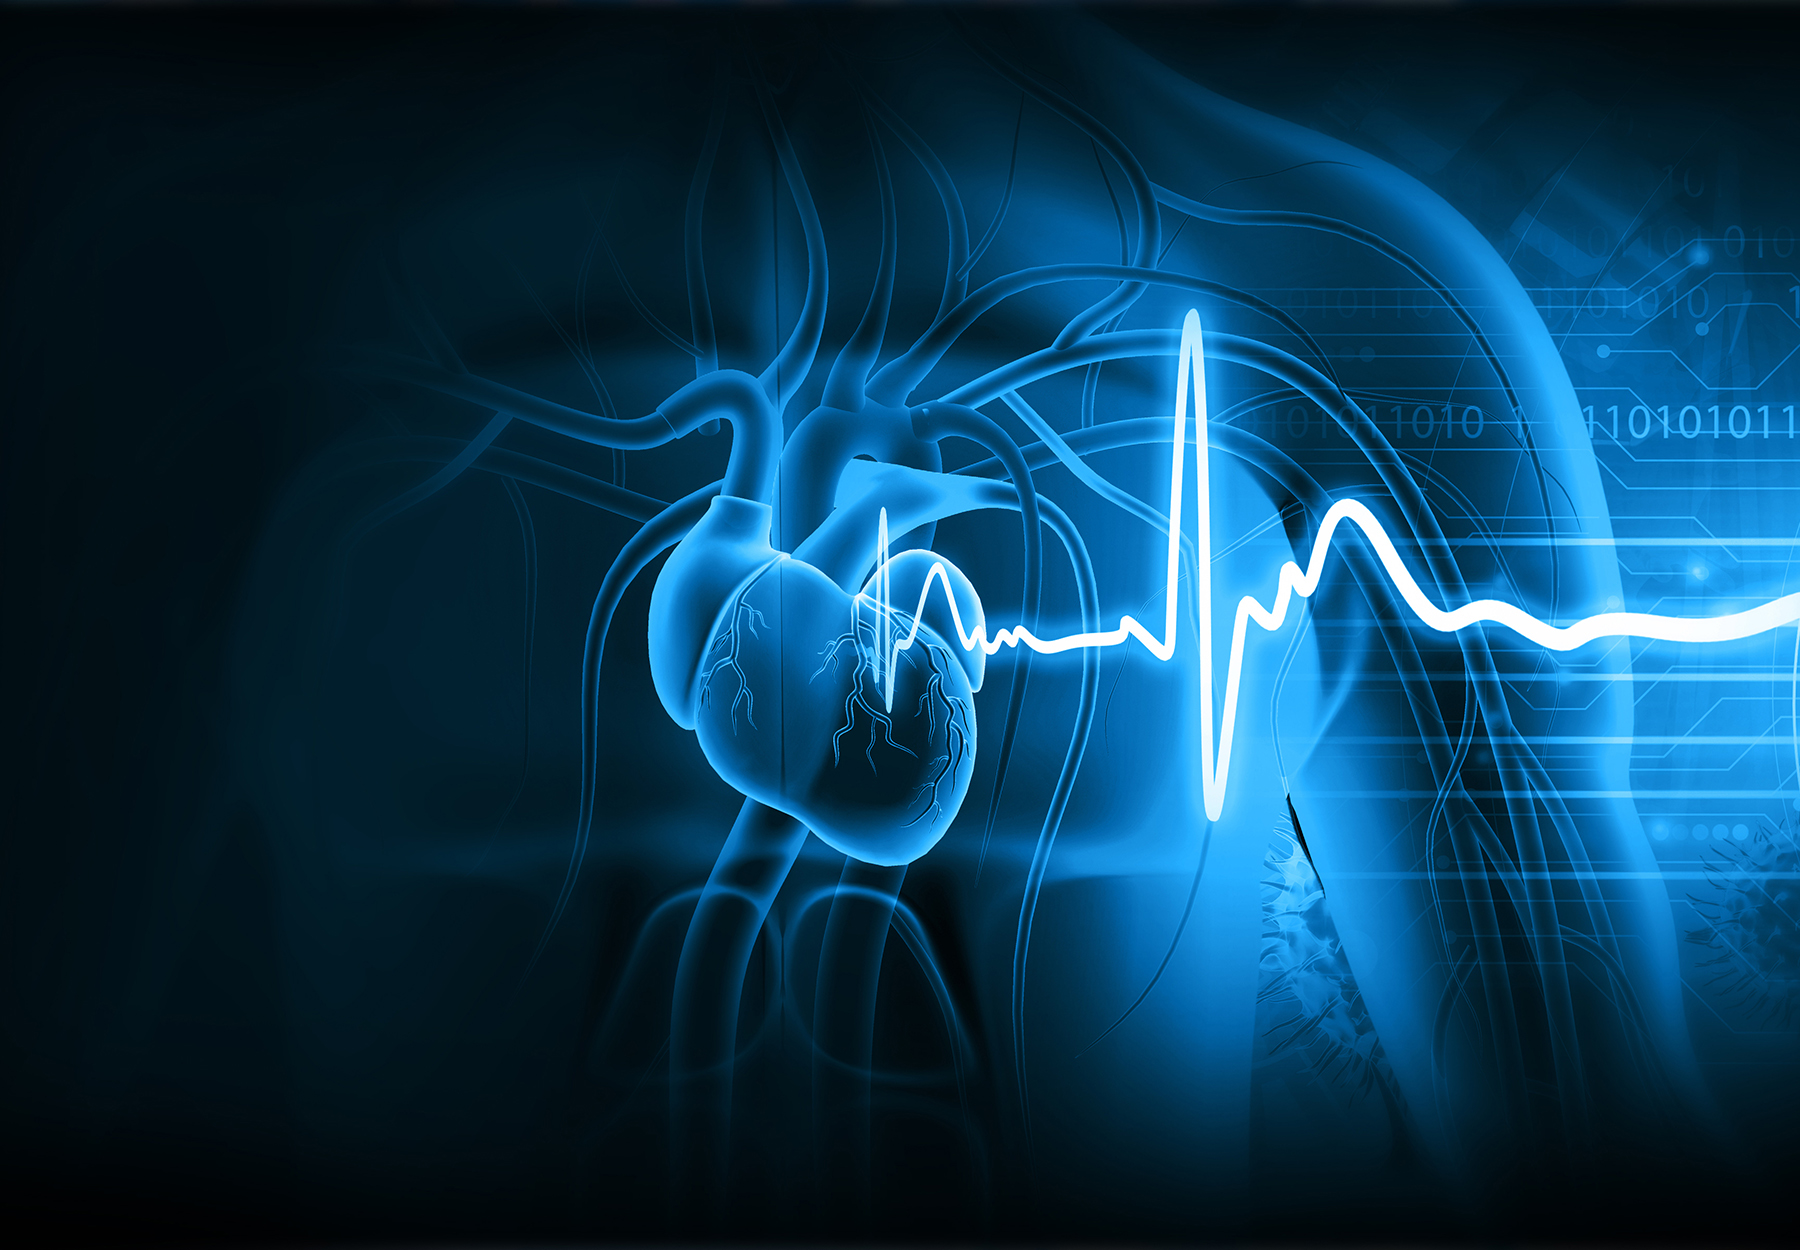 Human heart with ECG graph. 3d illustration in blue tones. Stock image.